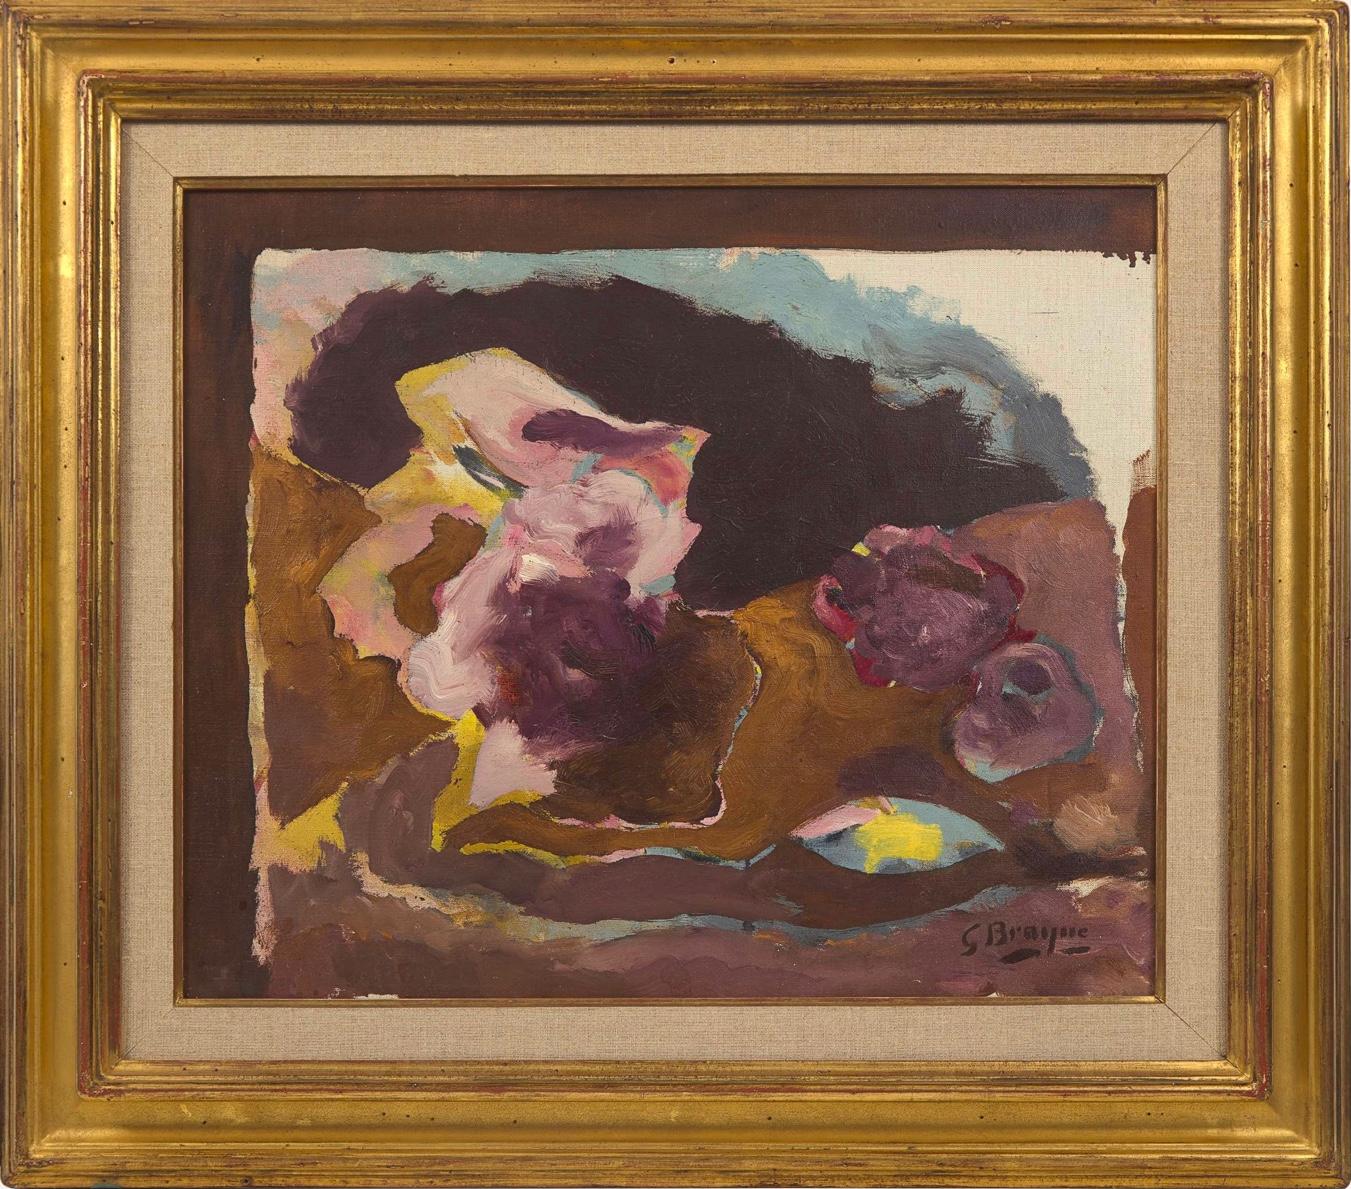 Georges Braque (French, 1882-1963) - Nature Morte au Pot
Signed ‘G Braque' (underlined) bottom right
Oil on canvas
Canvas: 18 x 21.75 in. (45.7 x 55.2cm)
Framed: 26 x 30 inches
Executed circa 1959

Provenance:
Galerie Beyeler, Basel,